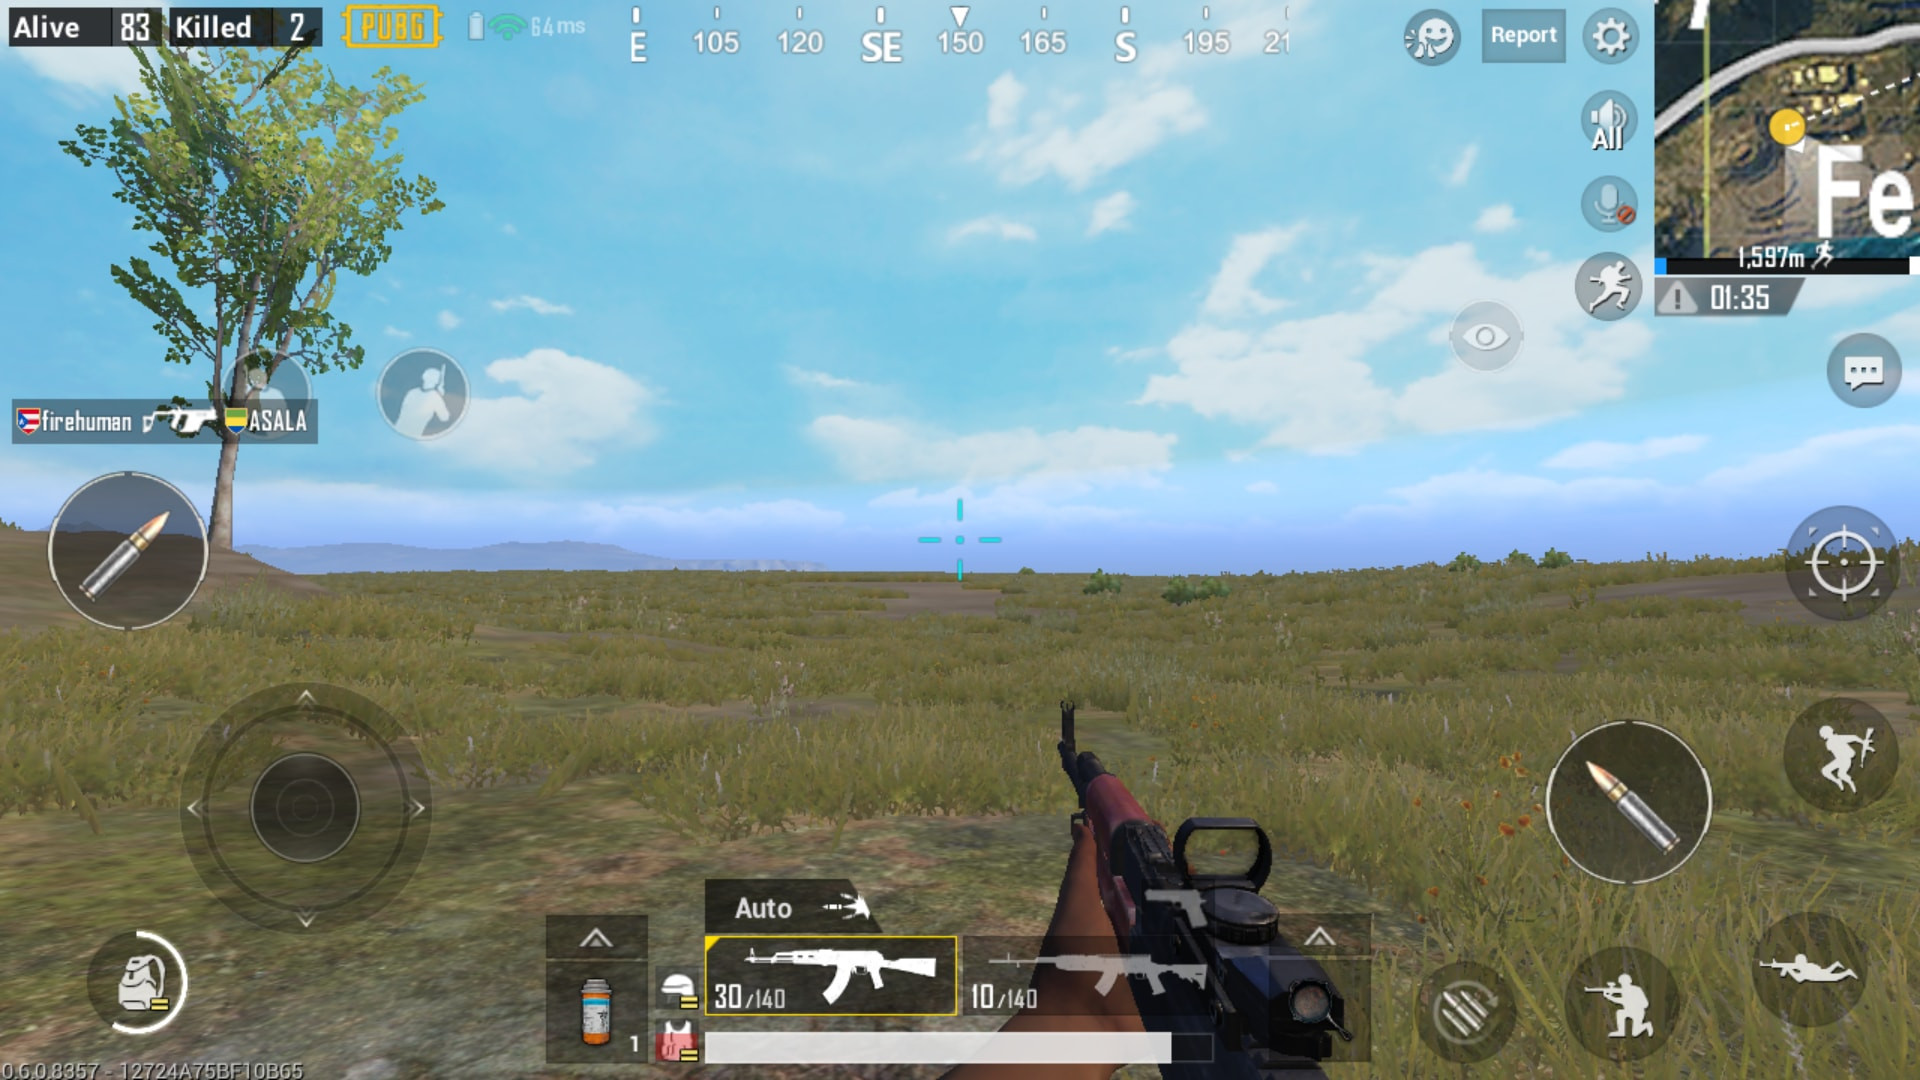 Ak-47 in First Person Perspective PUBG MOBILE - zilliongamer your game gudie